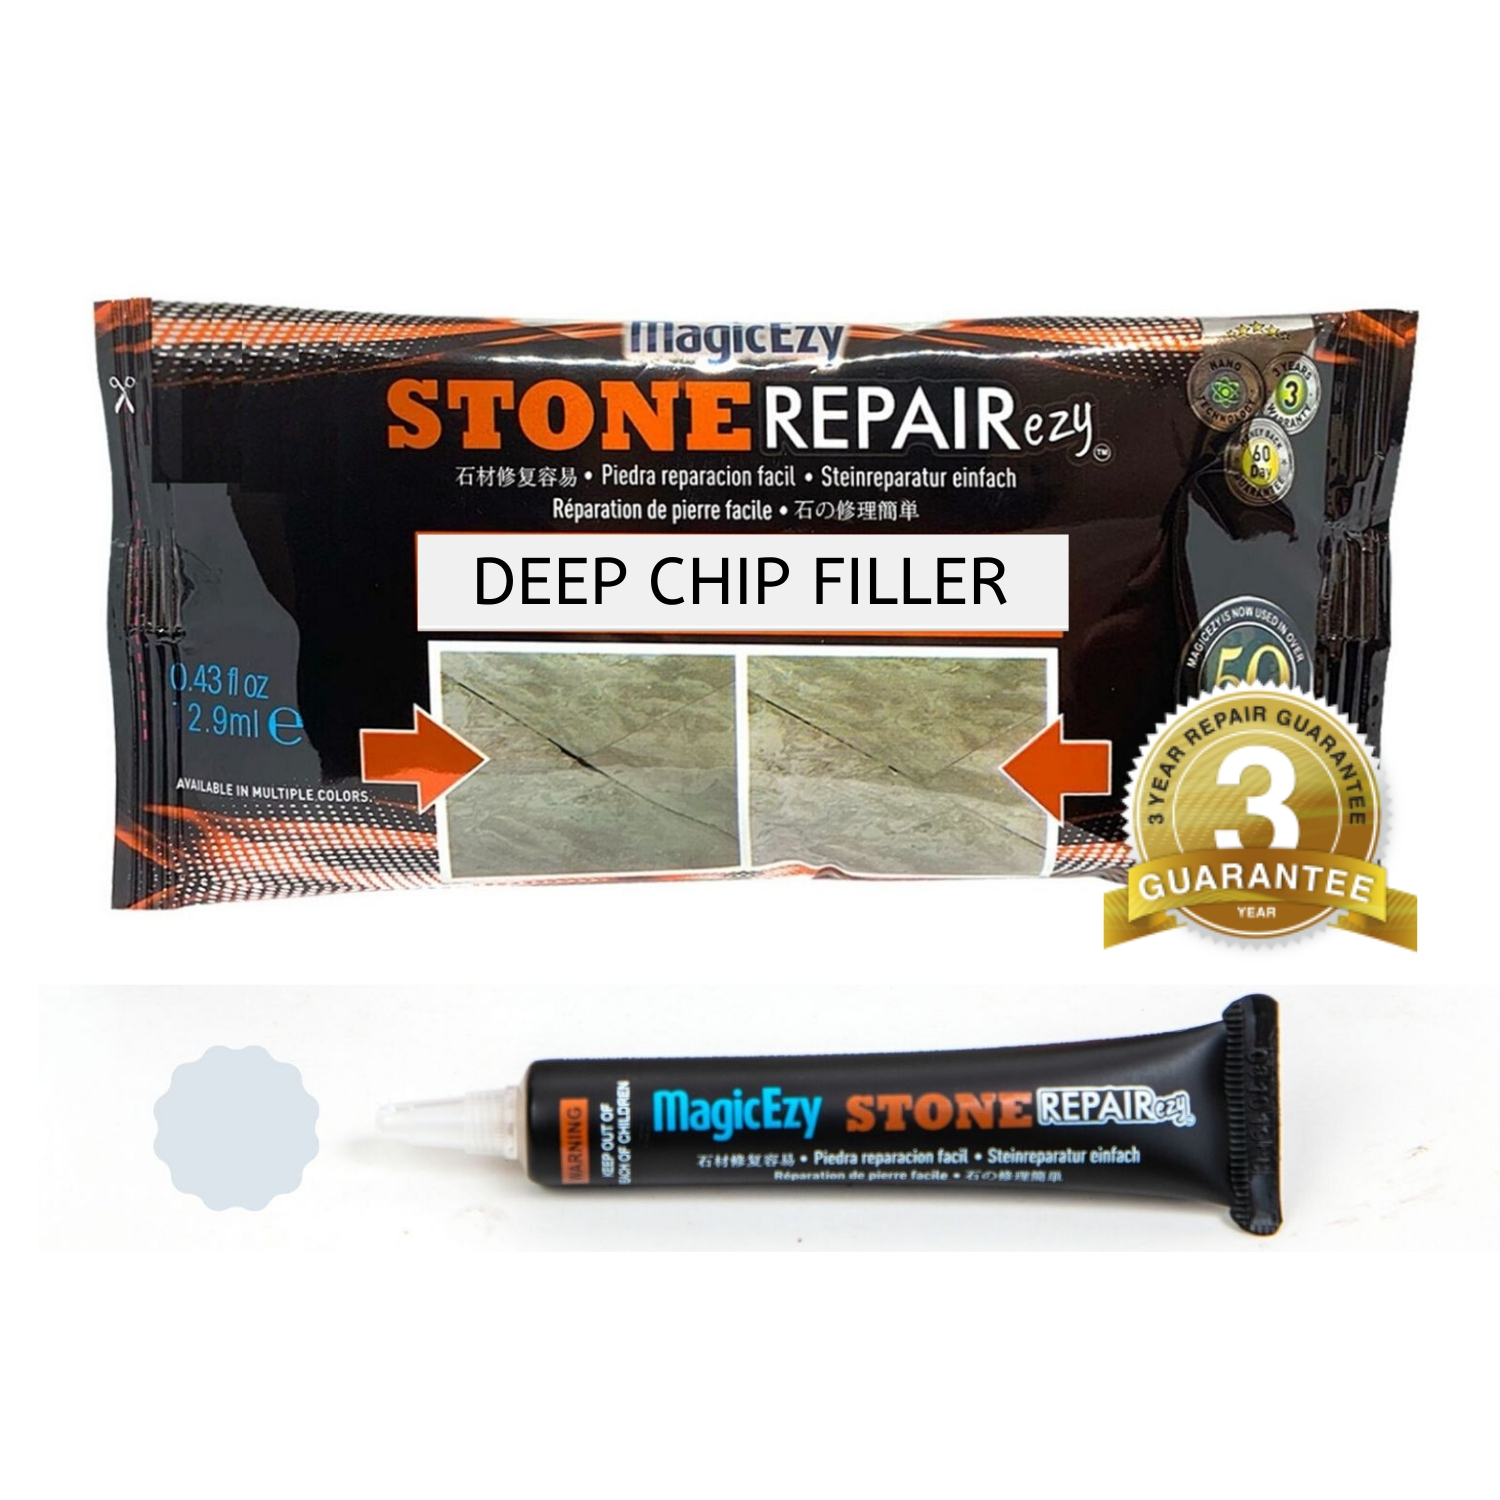 Deep Chip Filler Stone Fix Repair Deep Structural Damage Granite And Marble NEW* 